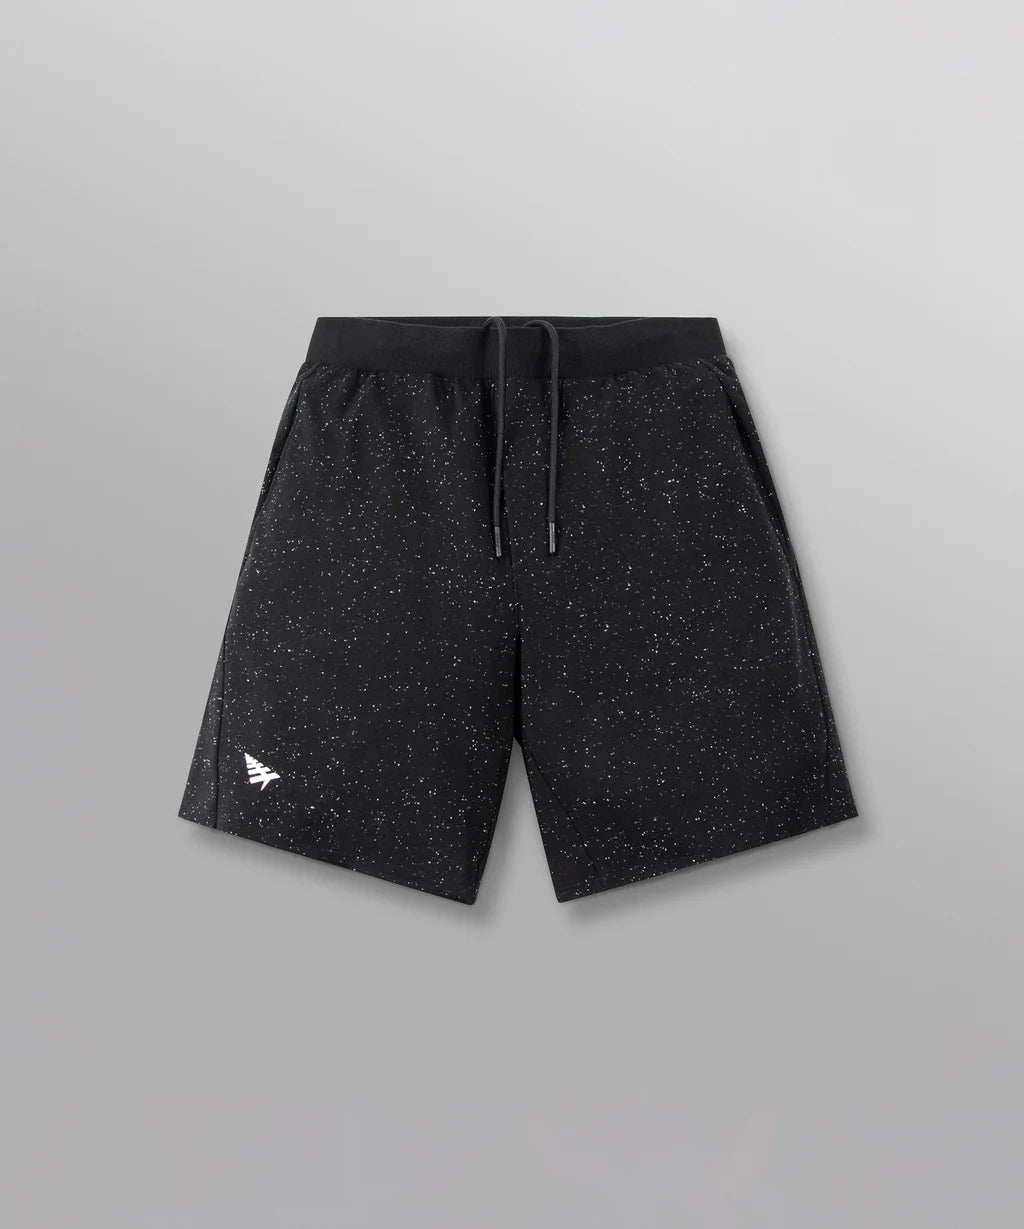 Paper Planes Speckled Planes Shorts